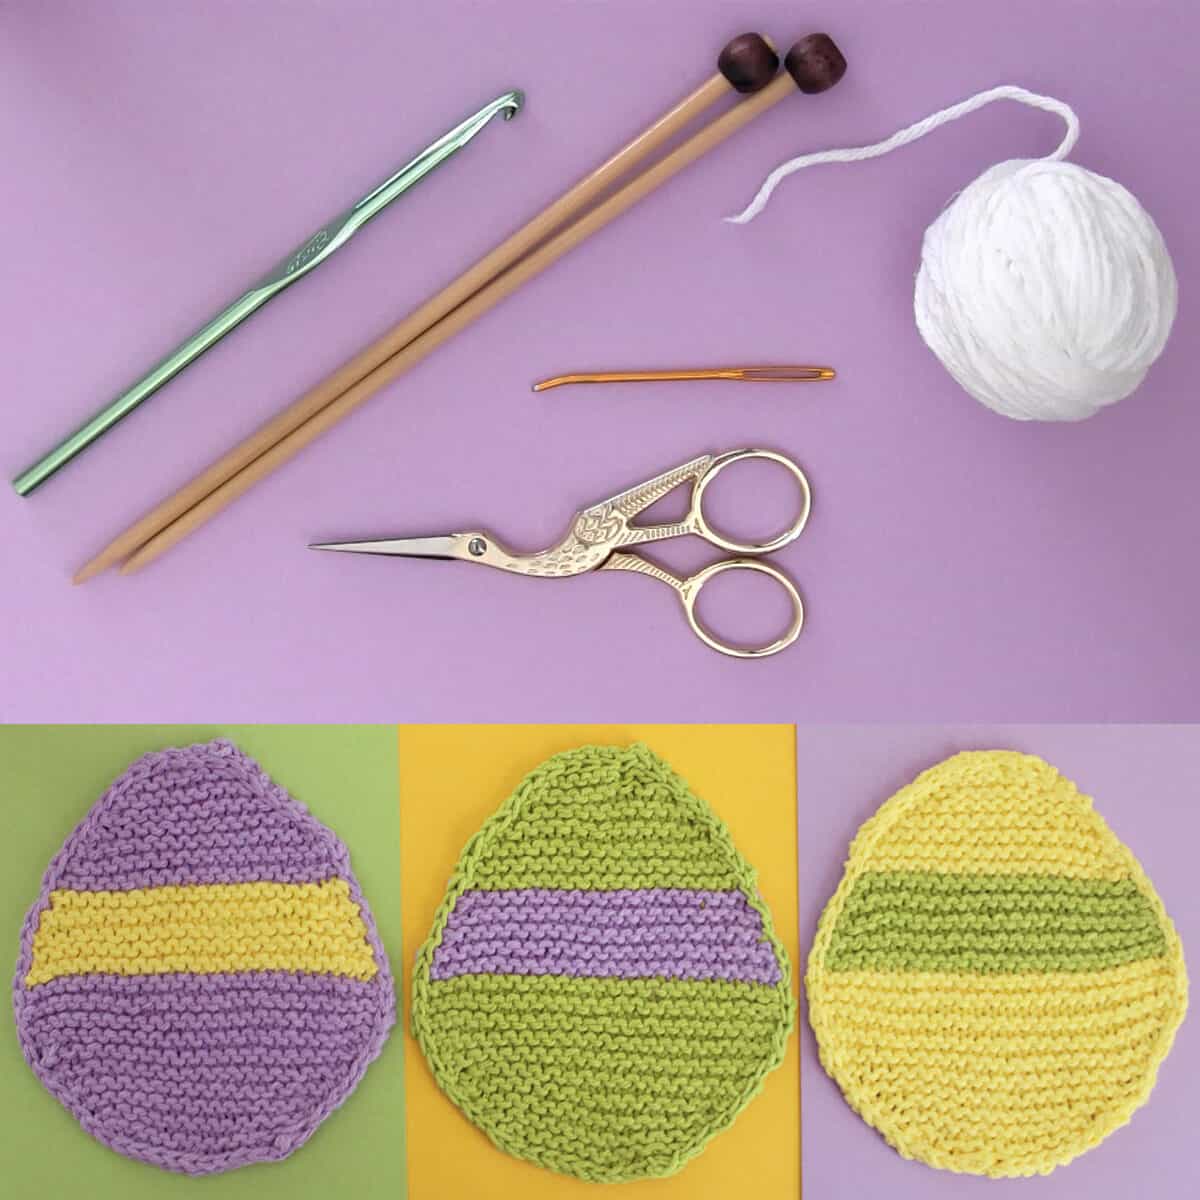 Knitting supplies of yarn, knitting needles, scissors, and a tapestry needle to make egg dishcloth shapes.